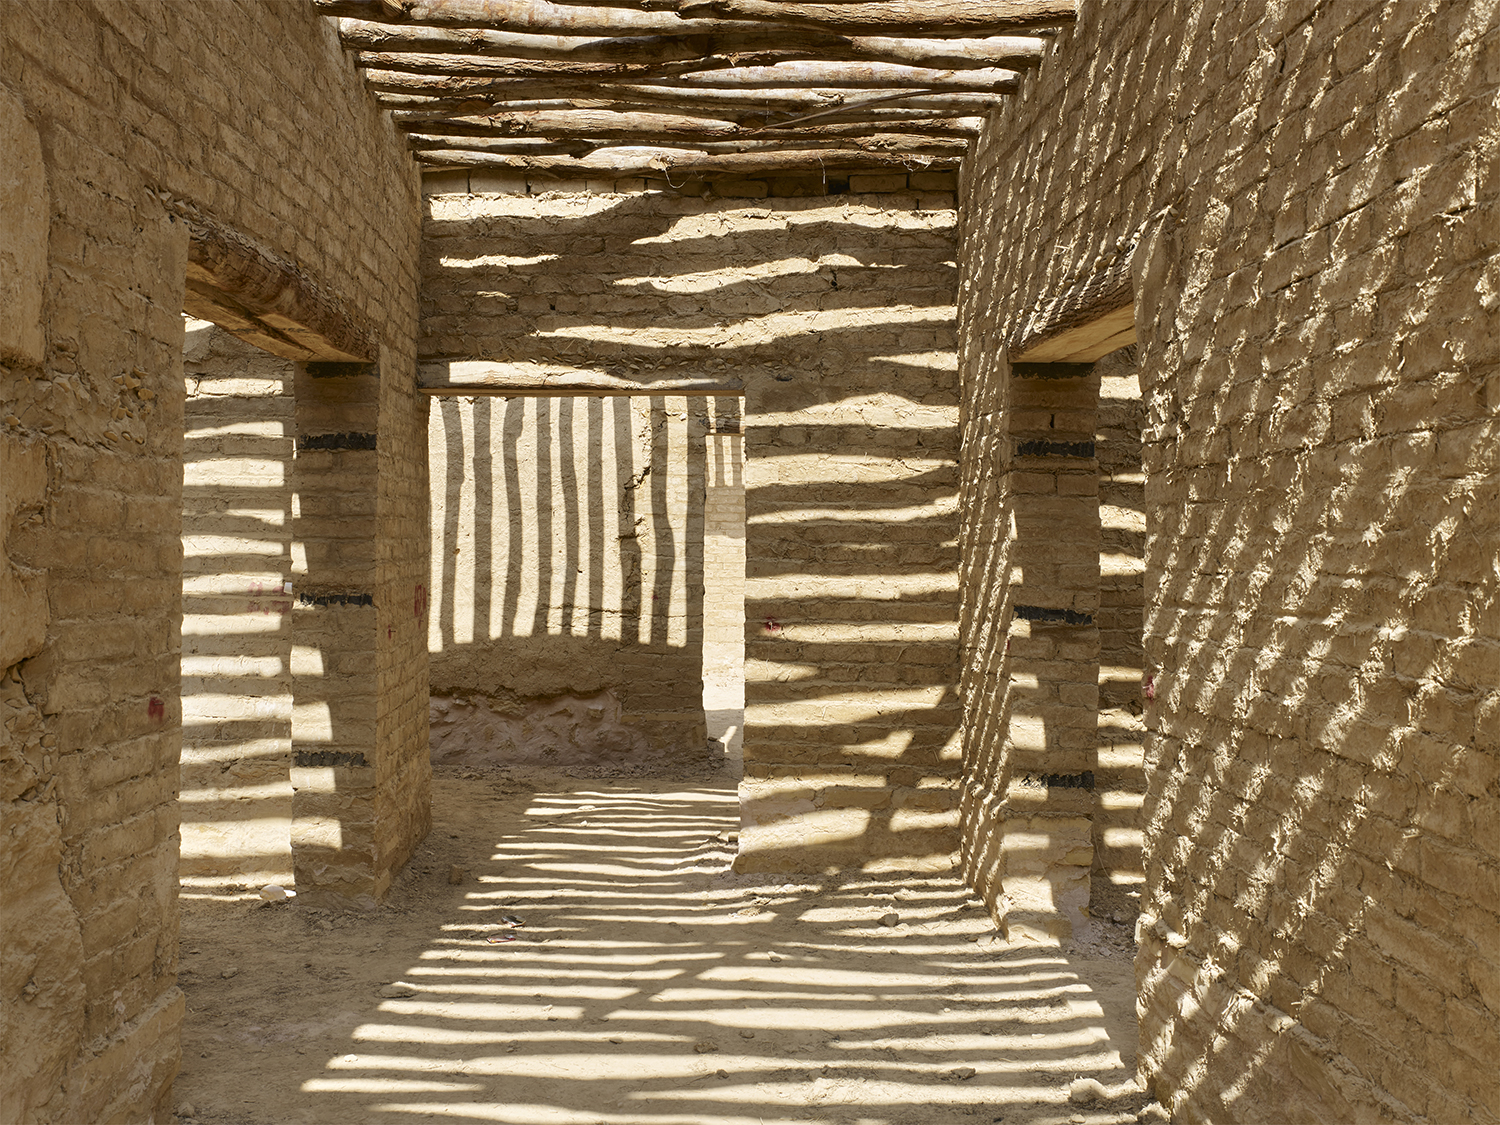 Reconstruction of an ancient building from the capital of the first Saudi dynasty, Turaif Historic District, Riyadh, Kingdom of Saudi Arabia. © Alan Karchmer.